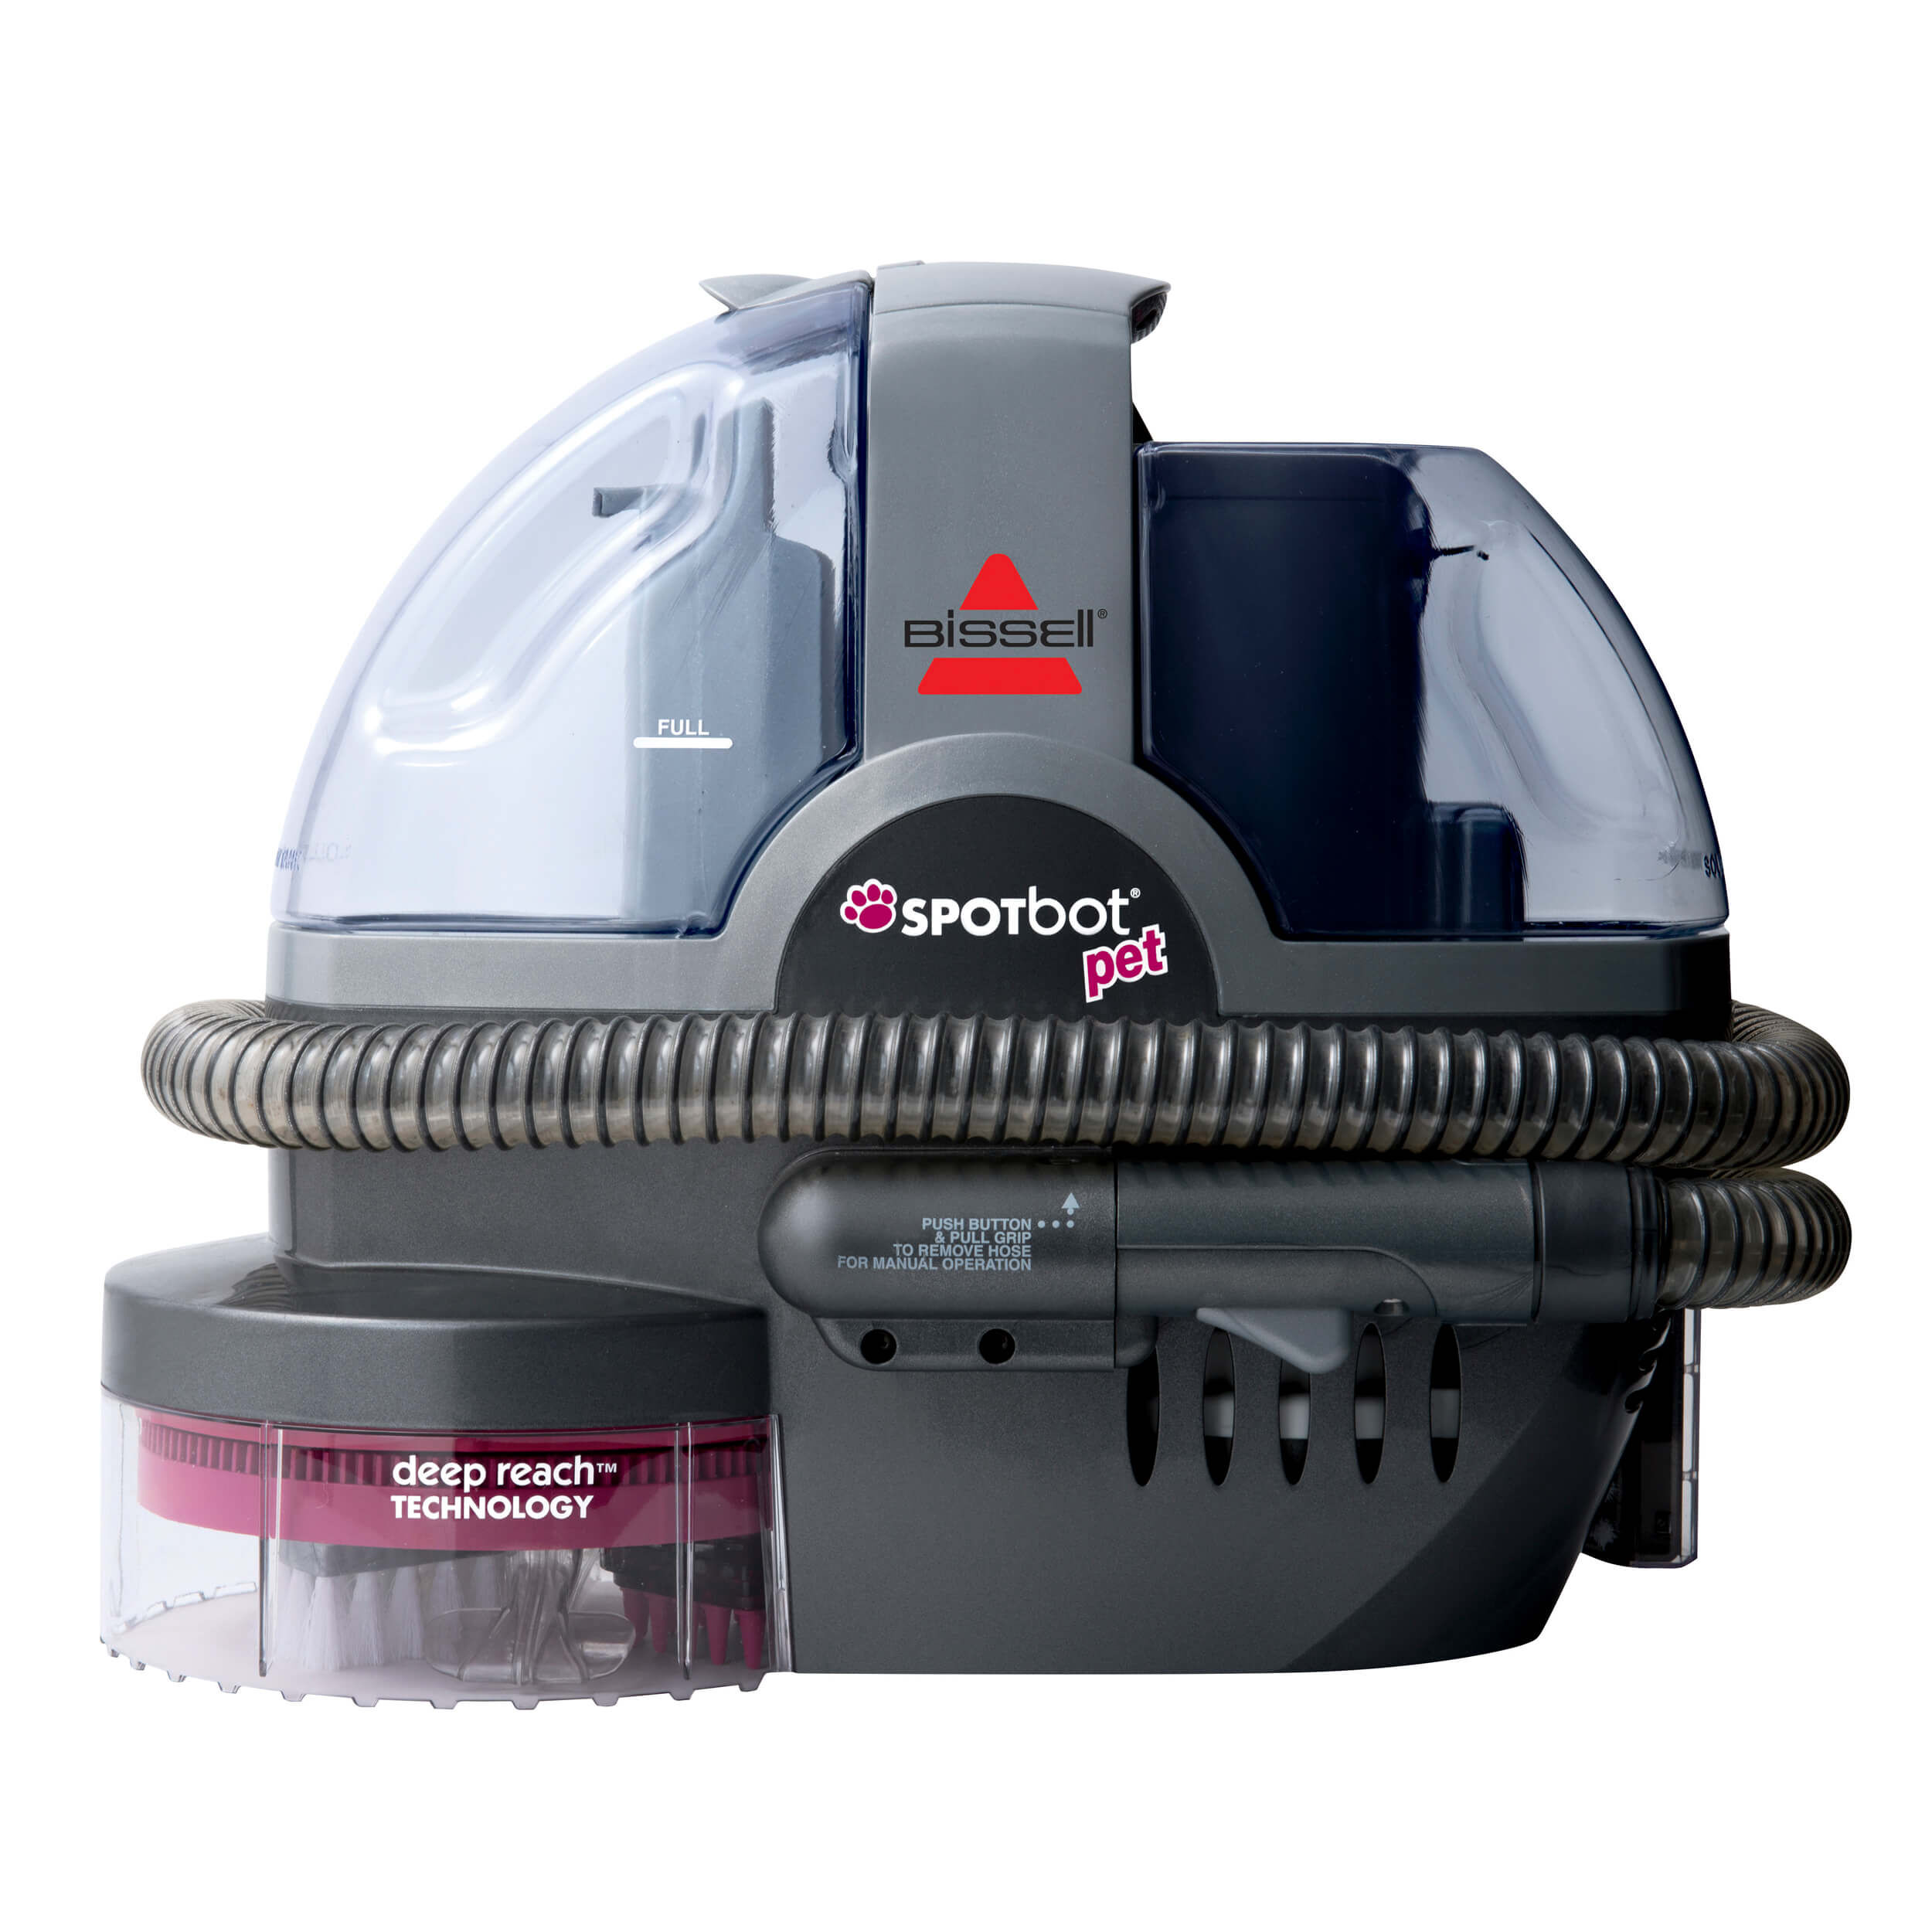 BISSELL® SpotBot® Pet Portable Carpet Cleaner 33N8A